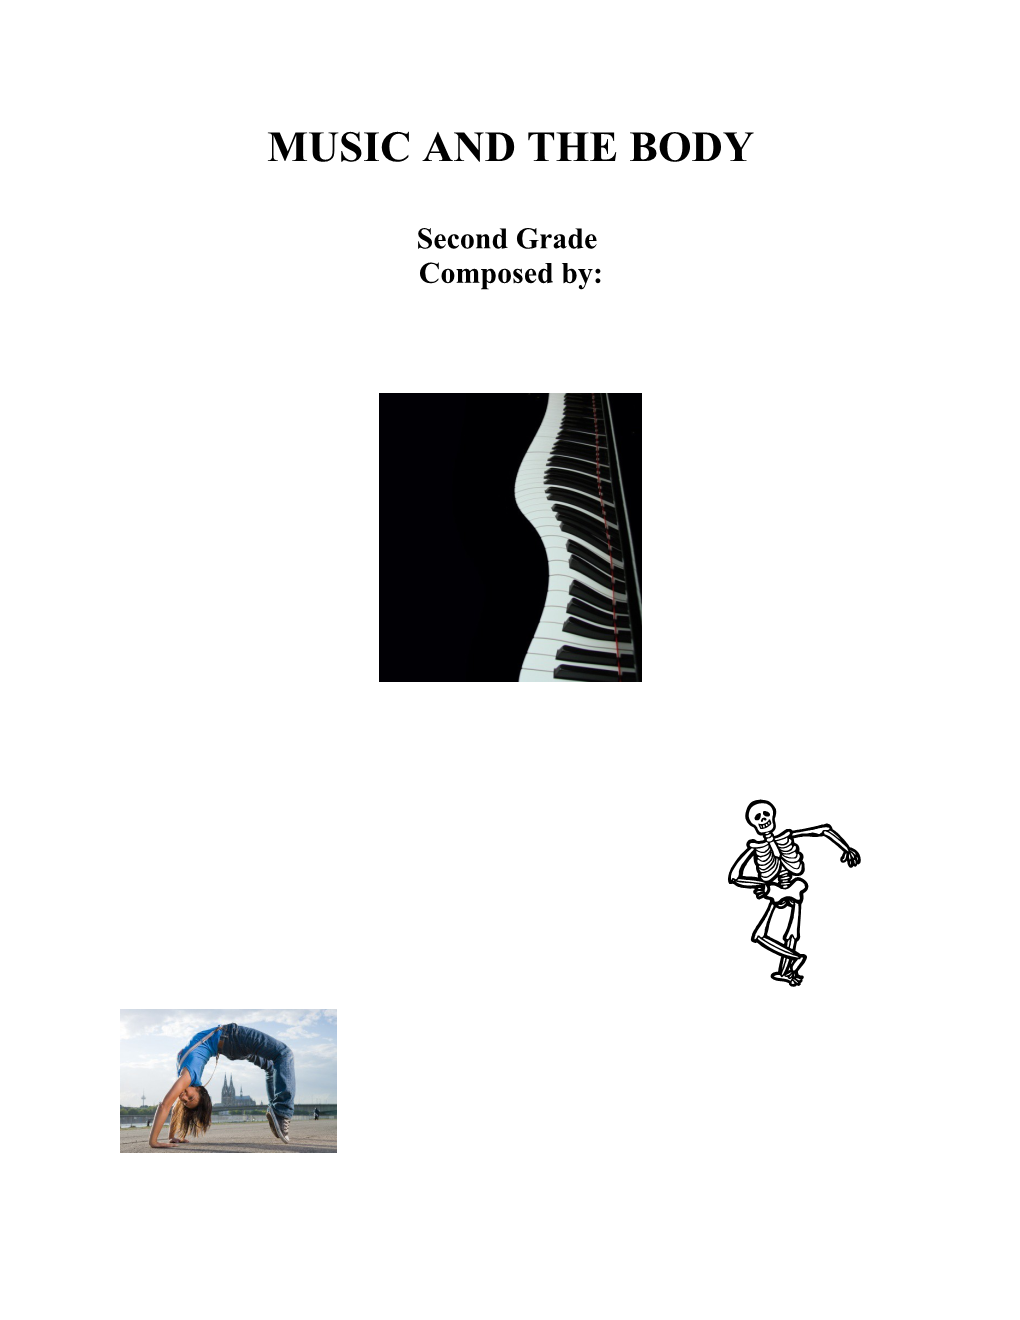 Music and the Body